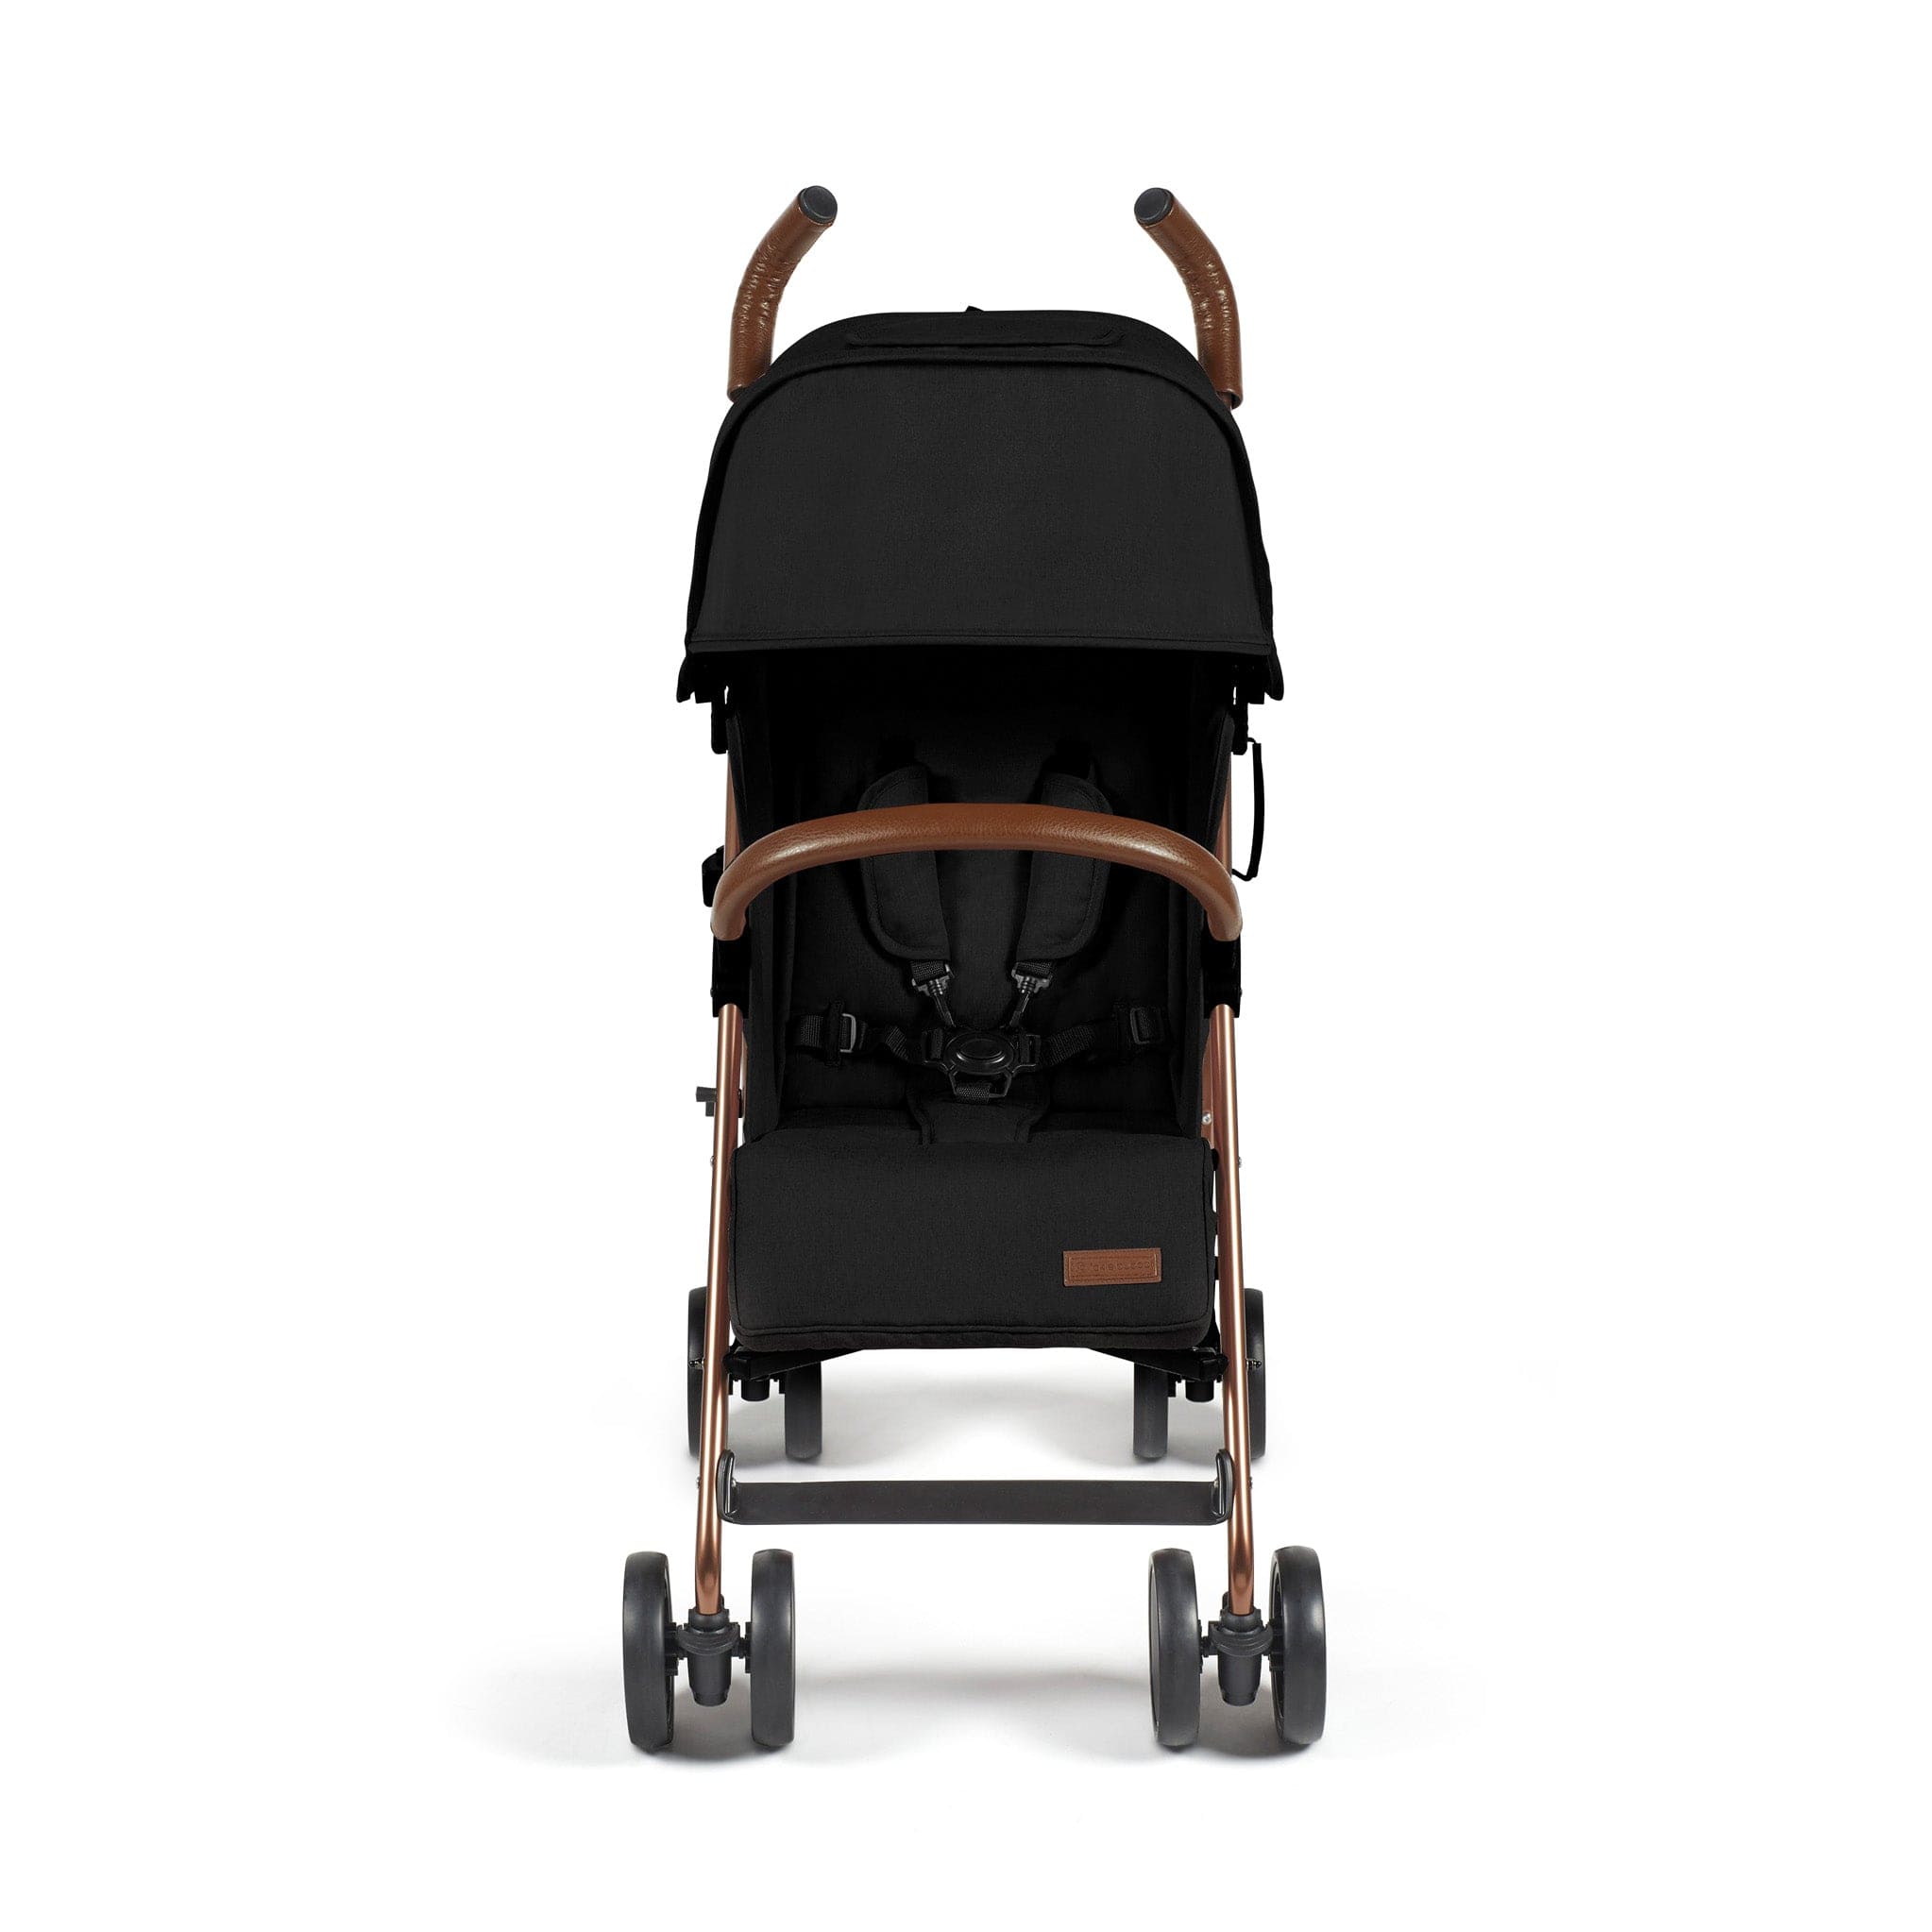 Ickle Bubba Discovery Prime Stroller Rose Gold/Black Pushchairs & Buggies 15-002-300-043 0700355999409